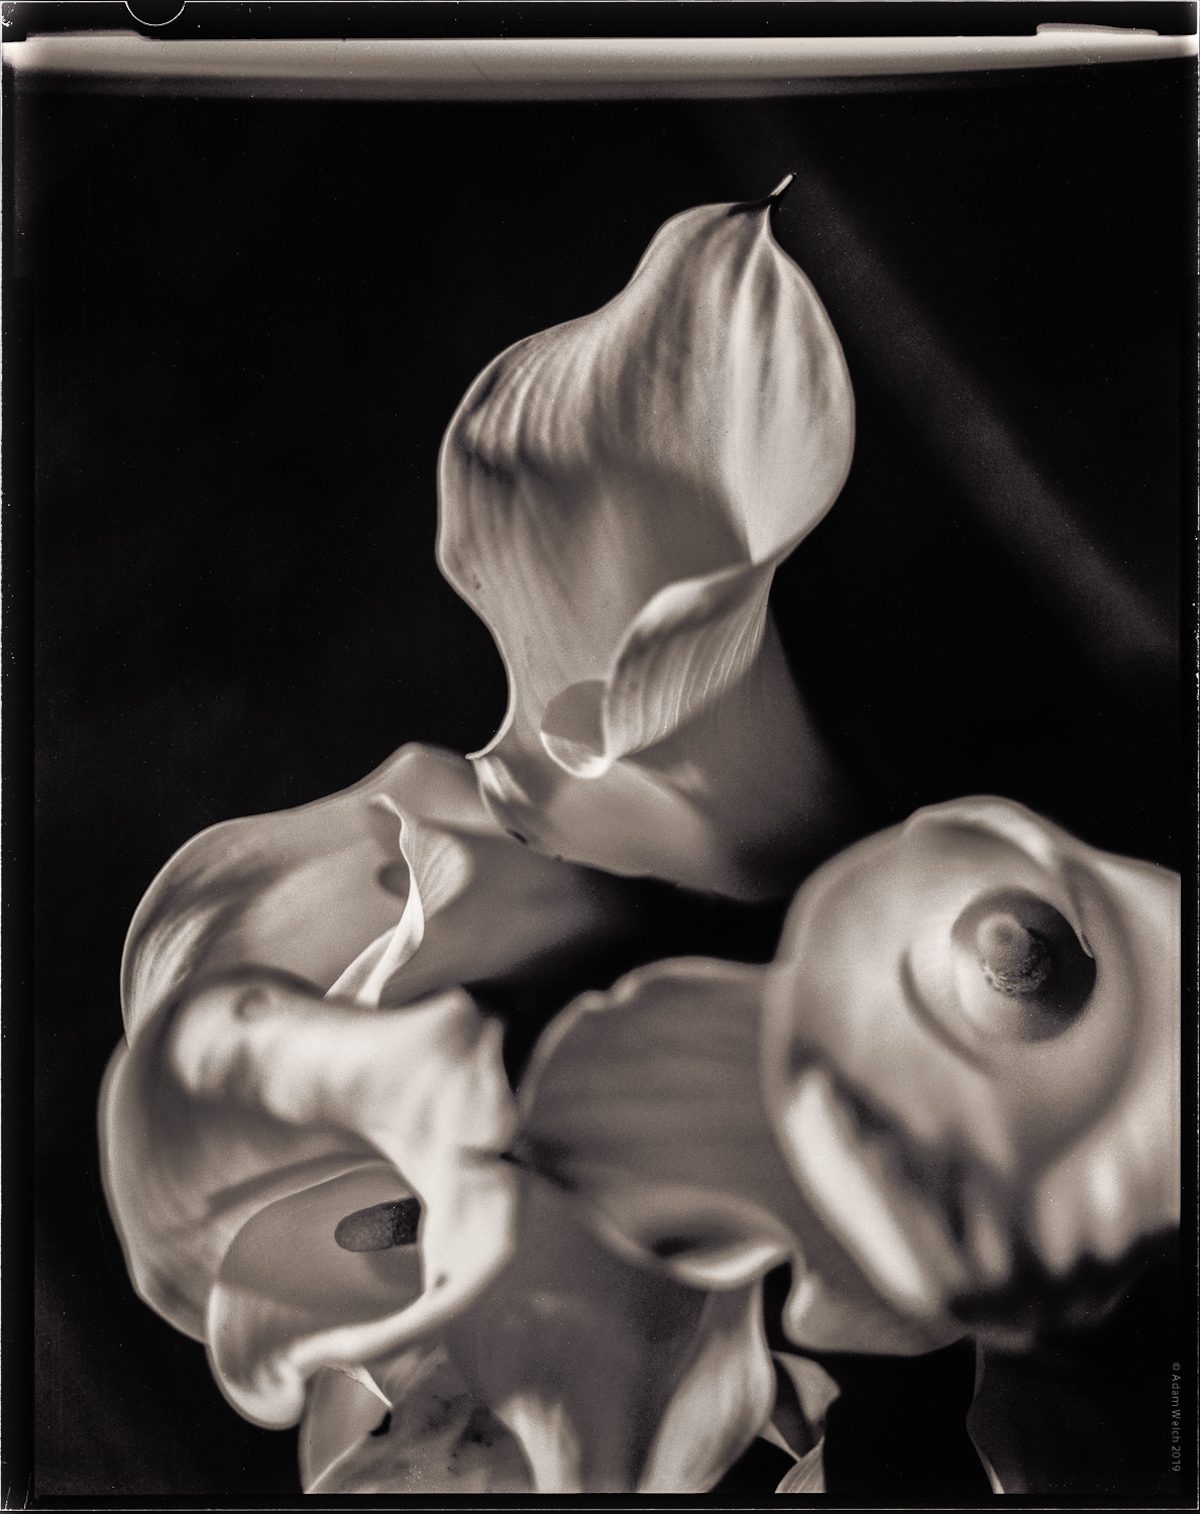 Imogen Cunningham Sublime Close-Up Botanical Photos from the 1920s and 1930s